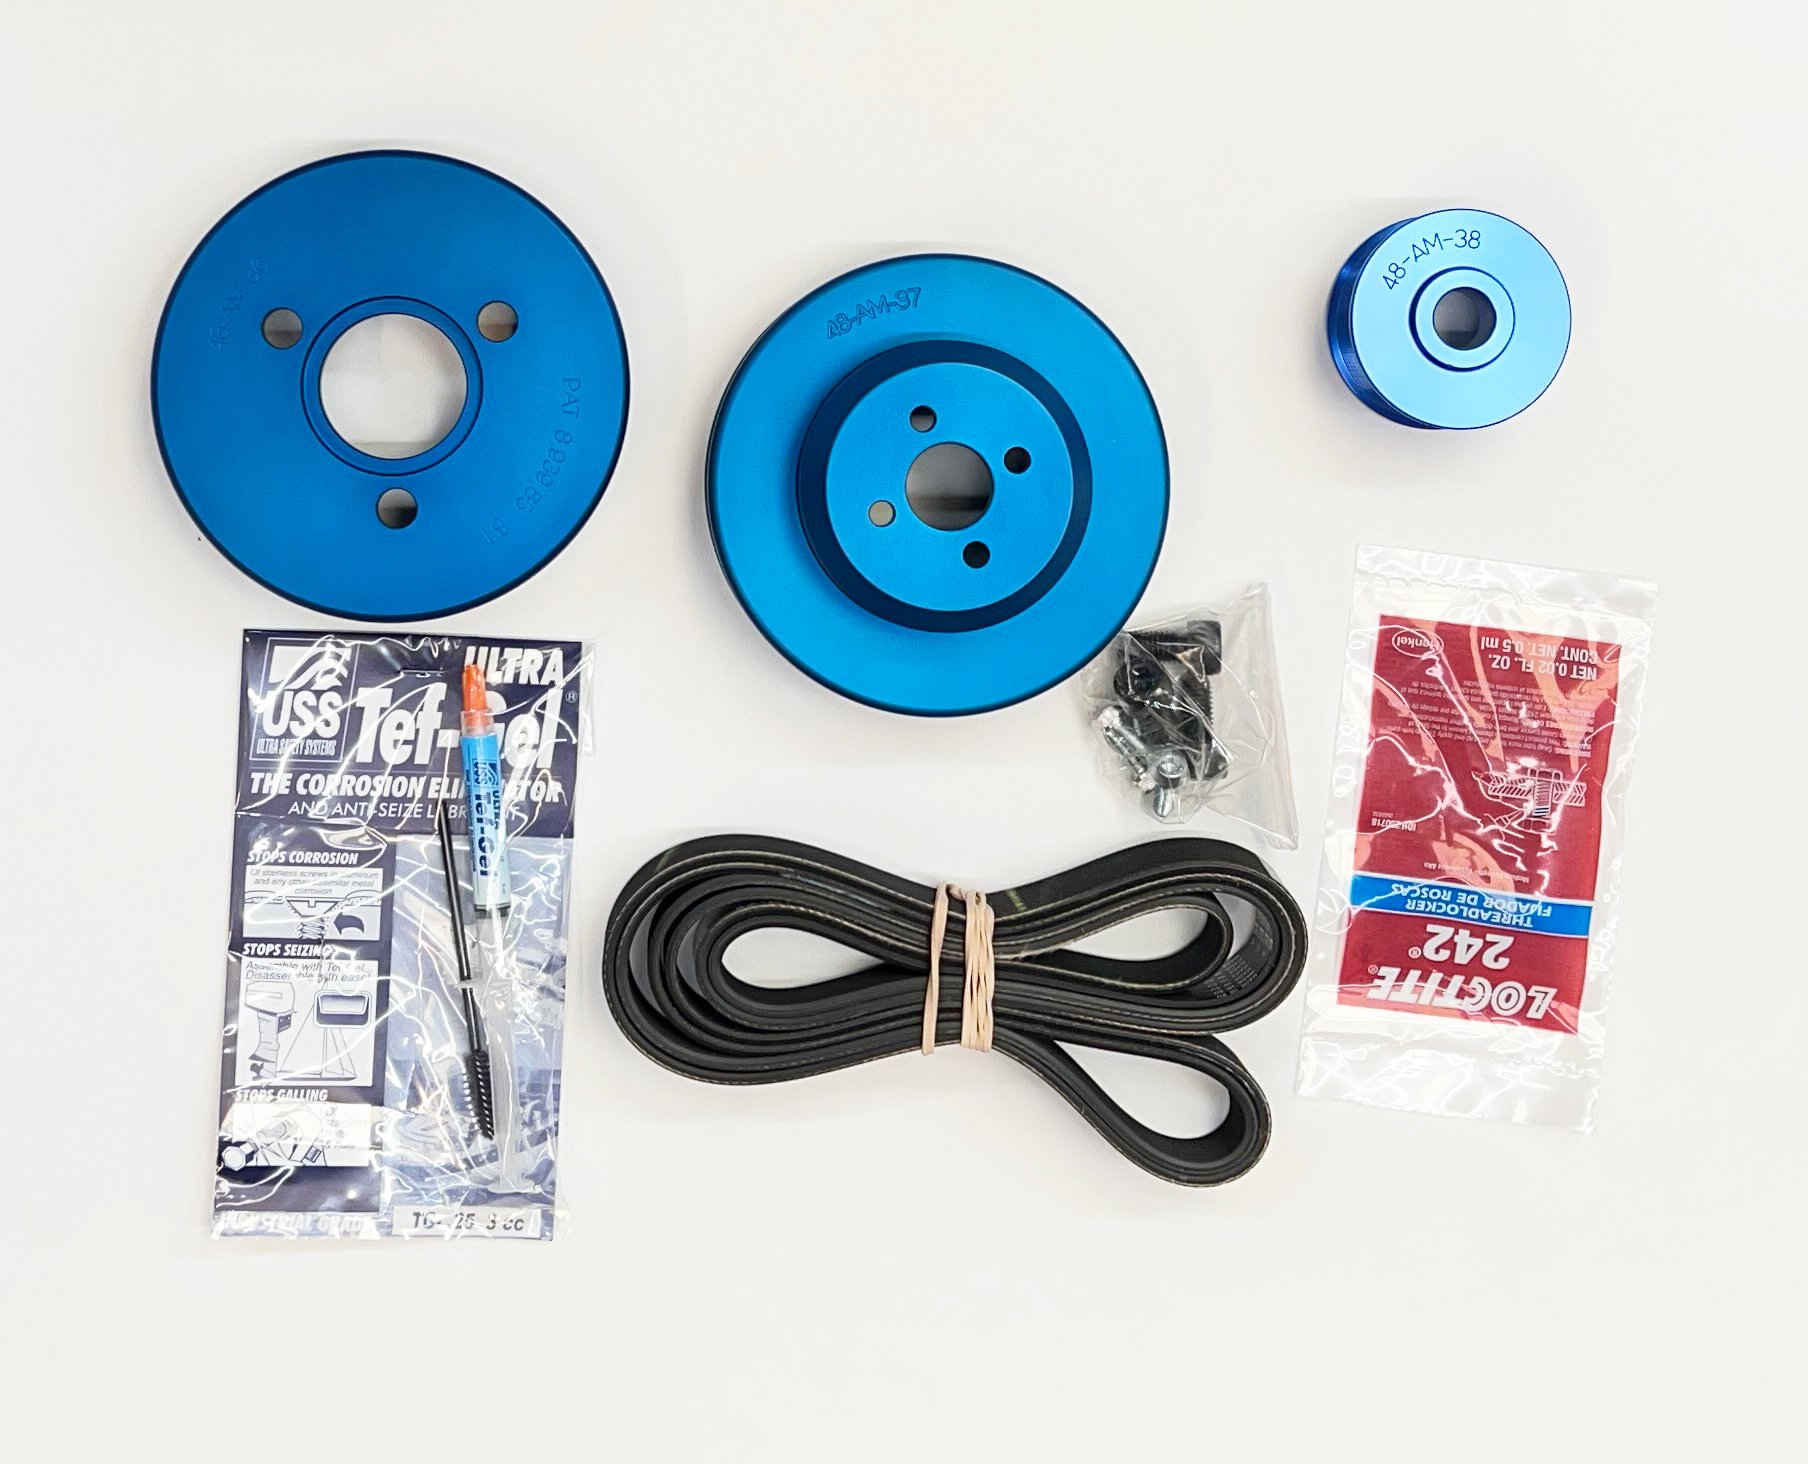 Is this pulley kit compatible with a Yanmar 4JH4 engine?